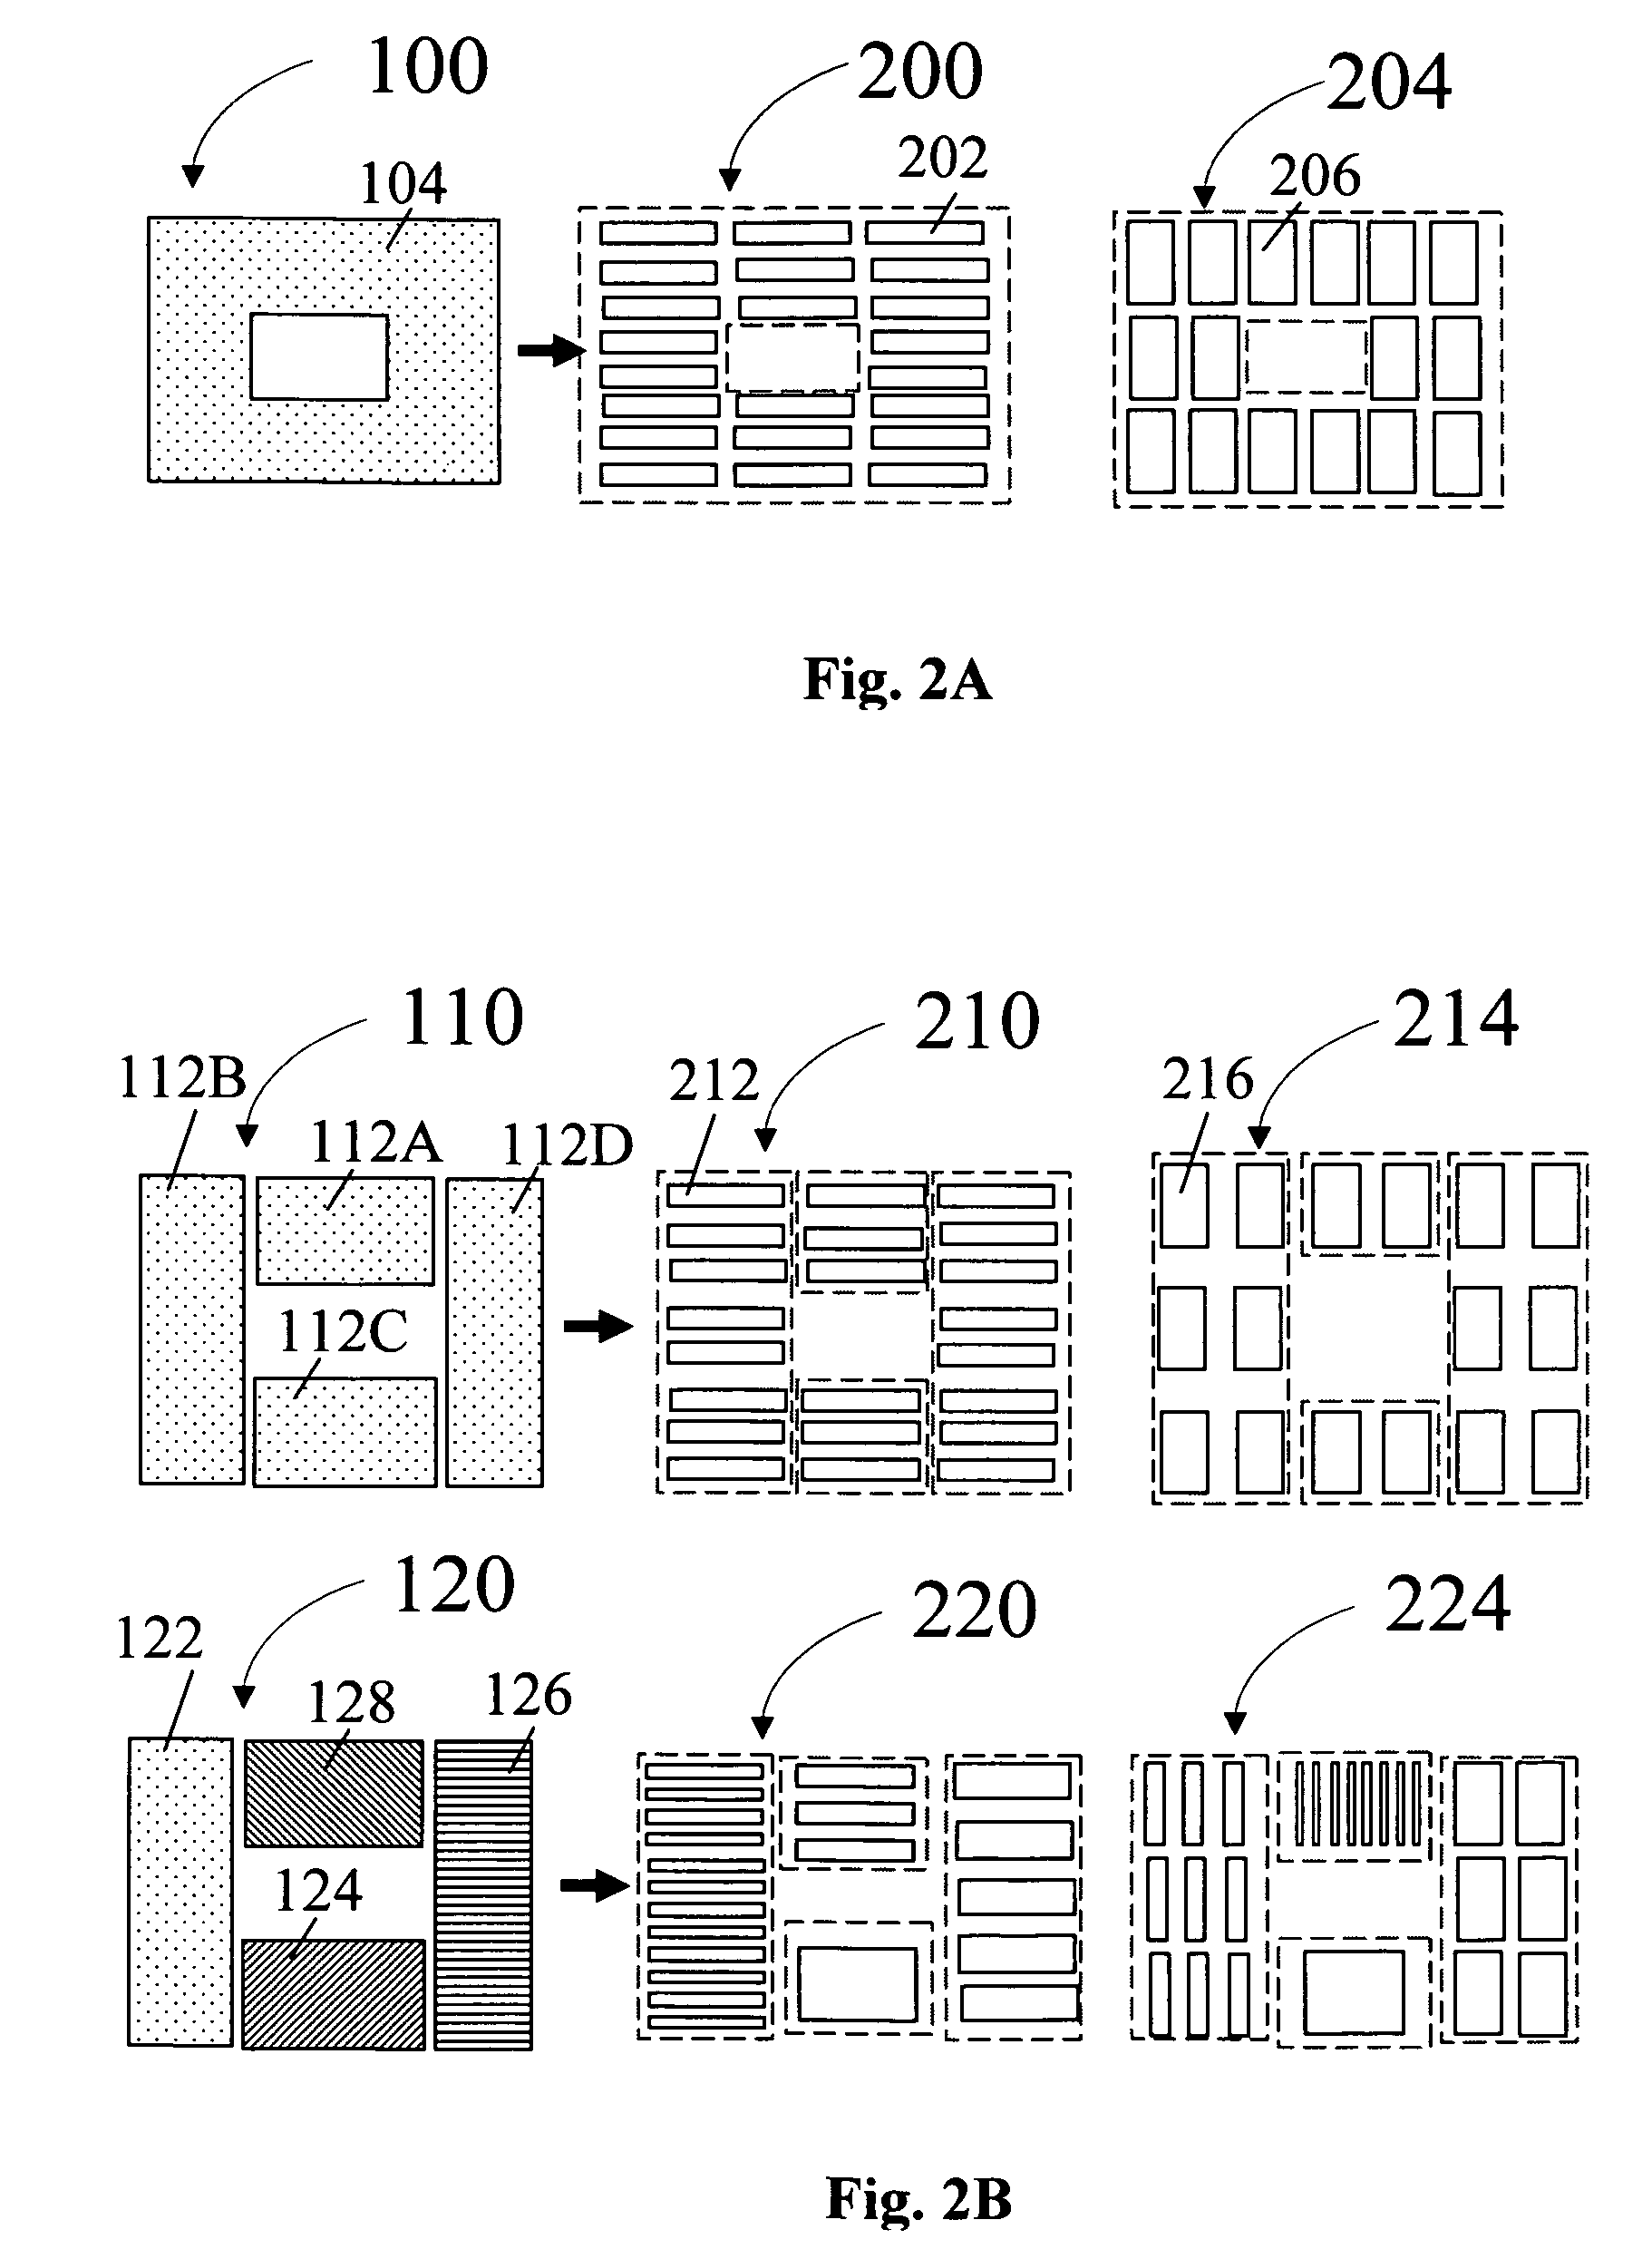 Evaluation method for interconnects interacted with integrated-circuit manufacture